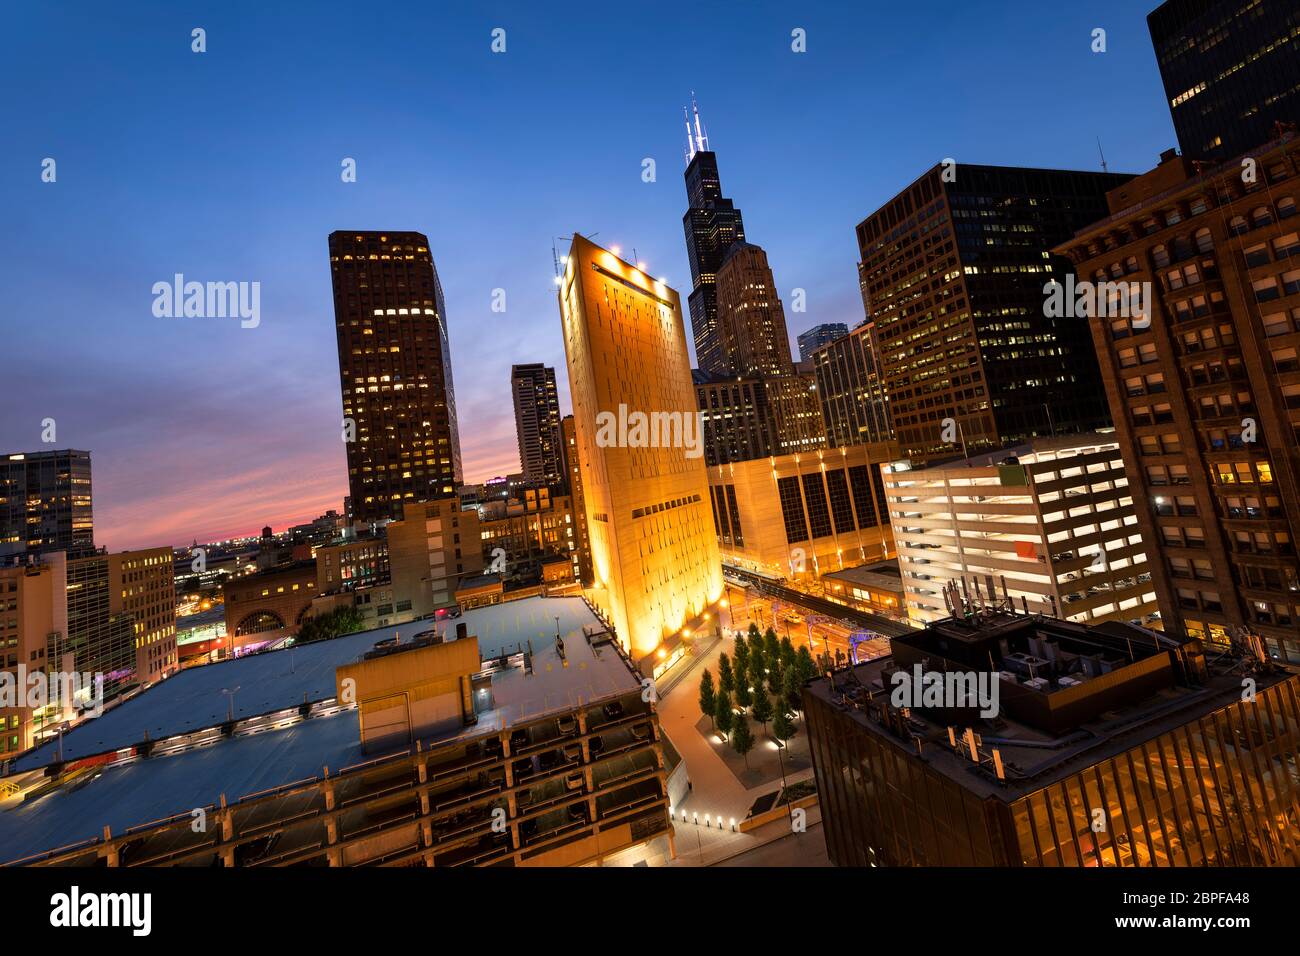 Chicago downtown. Cityscape image of Chicago downtown at sunset. - Image Stock Photo